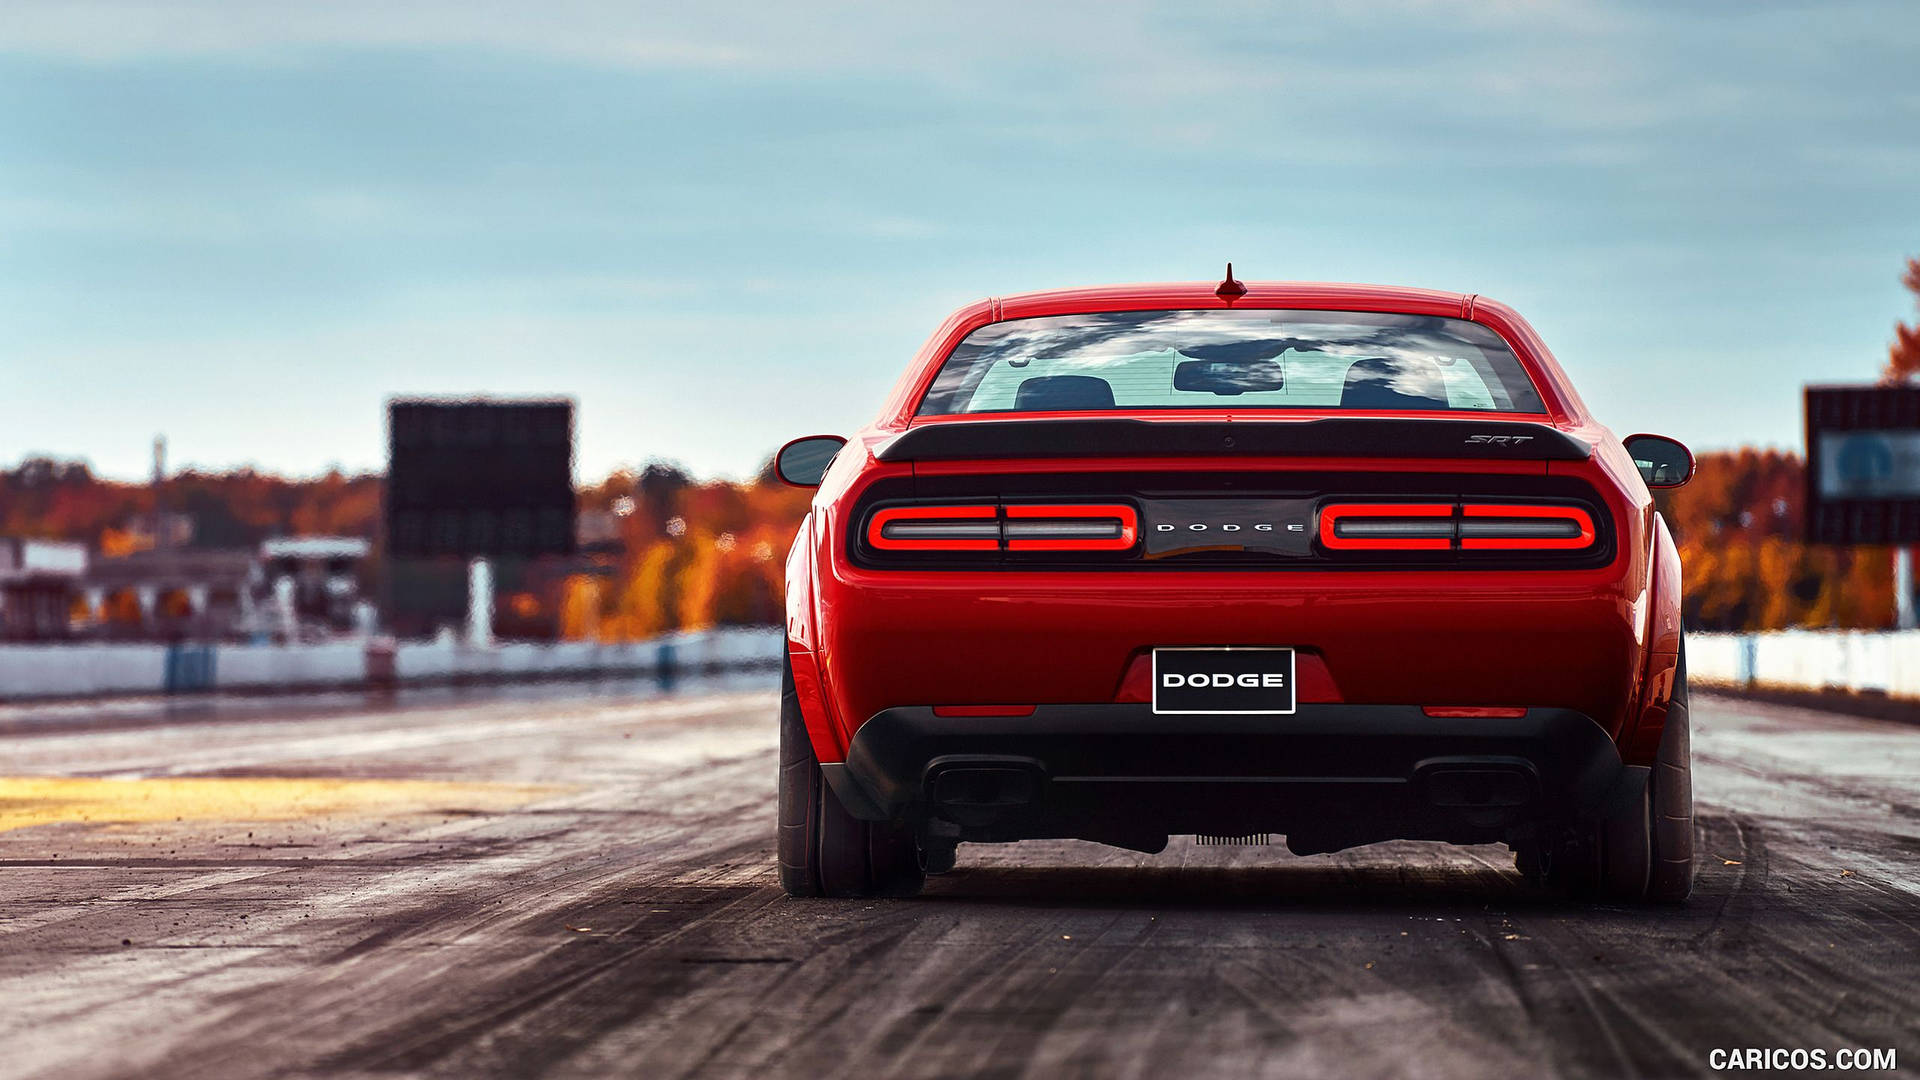 Dodge Challenger In Racing Track Background